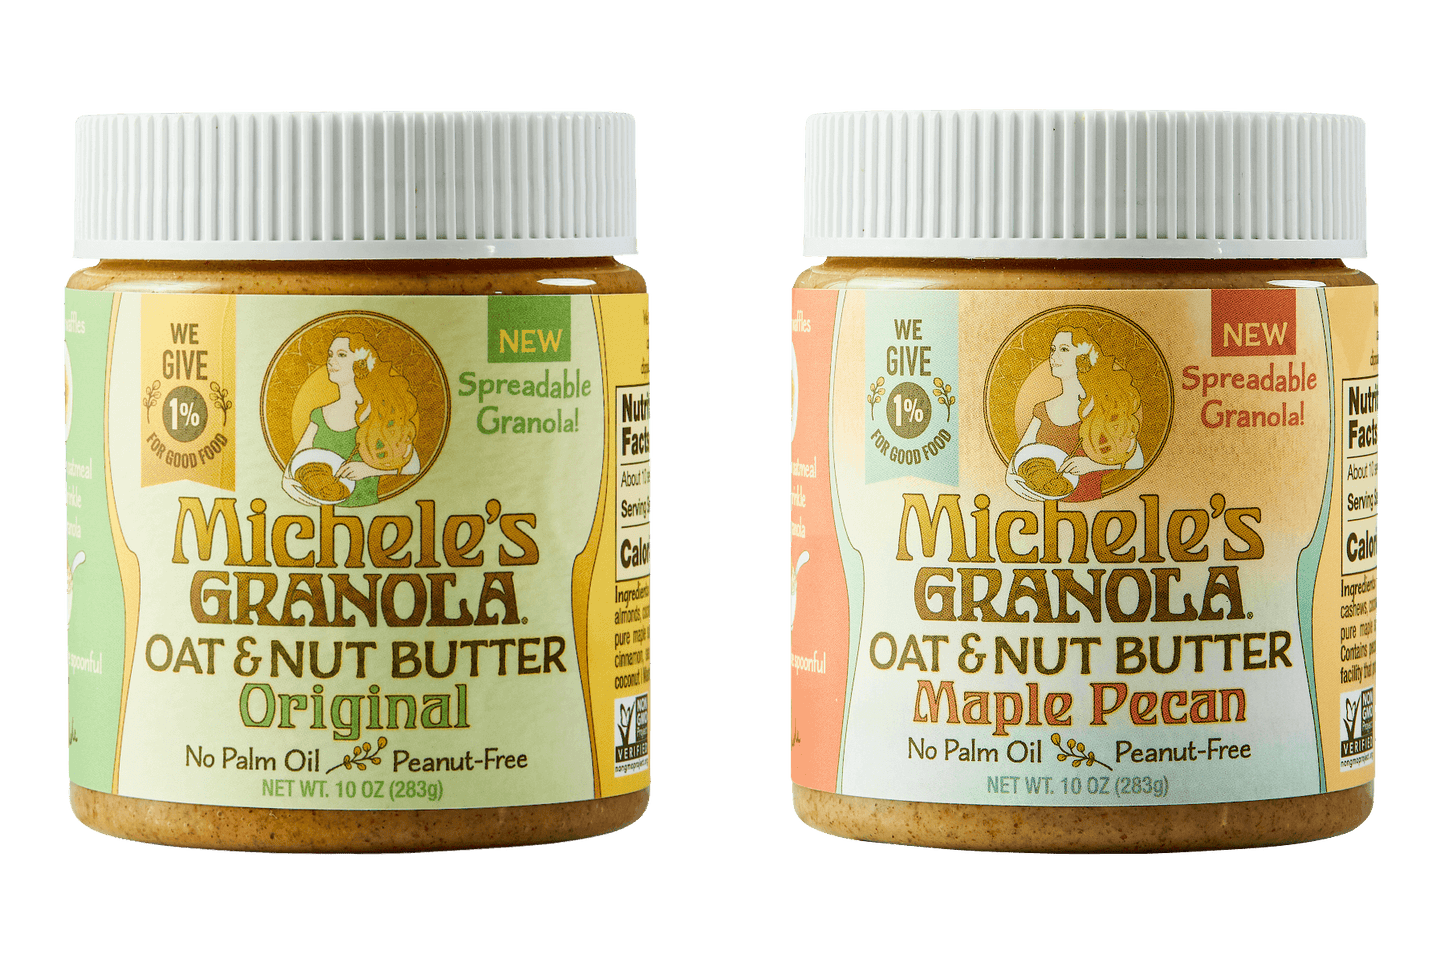 Michele's Oat & Nut Butter - granola butter available in Original and Maple Pecan 